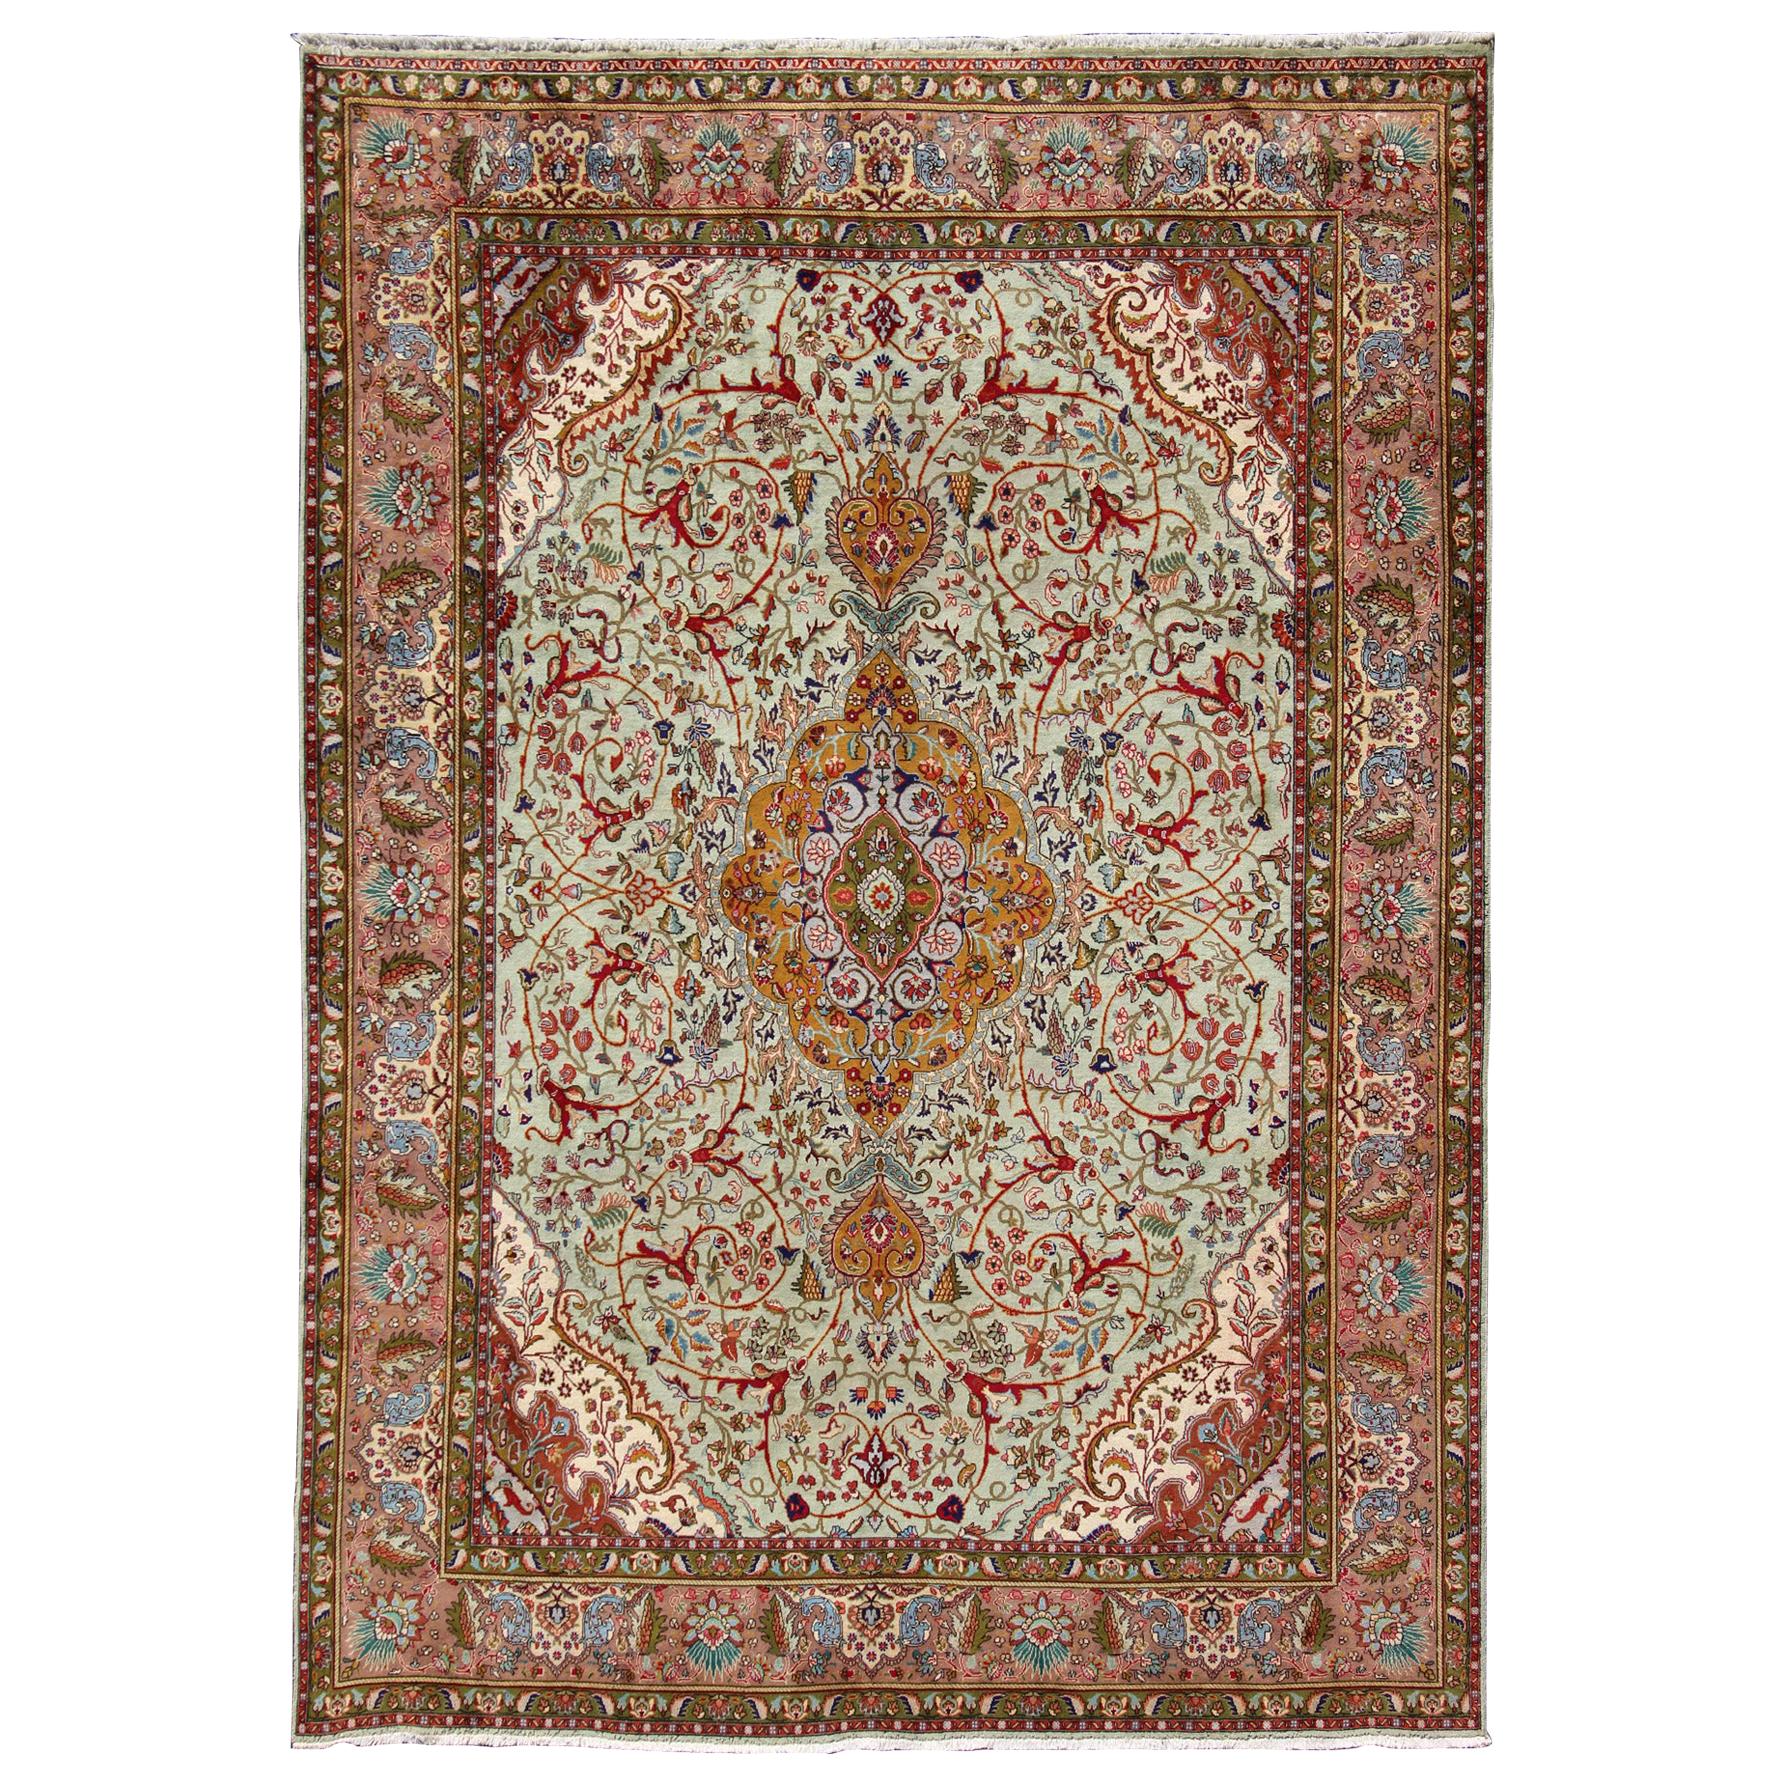 Classic Persian Tabriz Vintage Rug in Celadon Green, Salmon and Multi-Colors For Sale